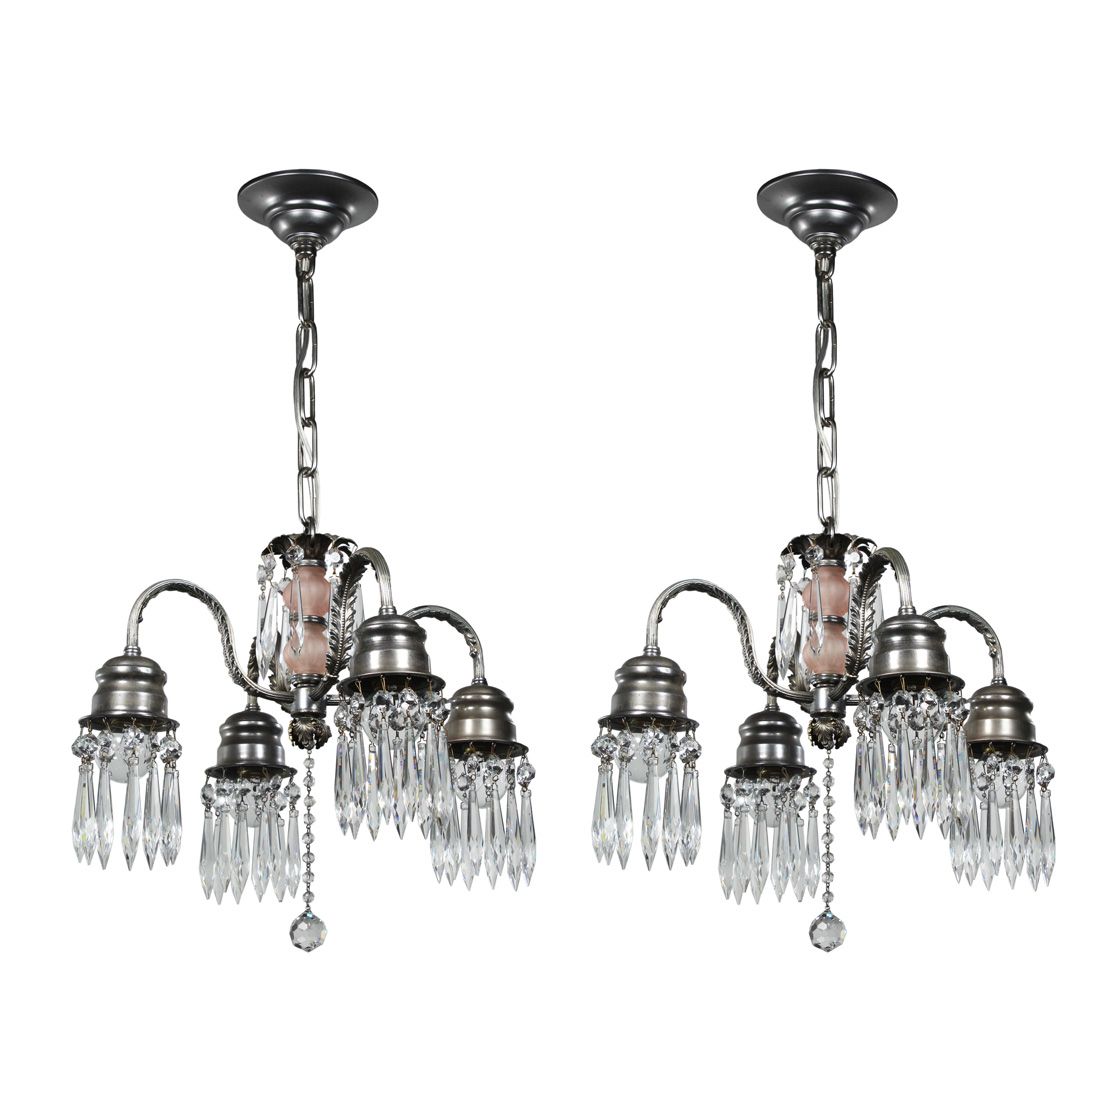 Sold Matching Antique Four Light Chandeliers With Prisms For Four Light Antique Silver Chandeliers (Photo 4 of 15)